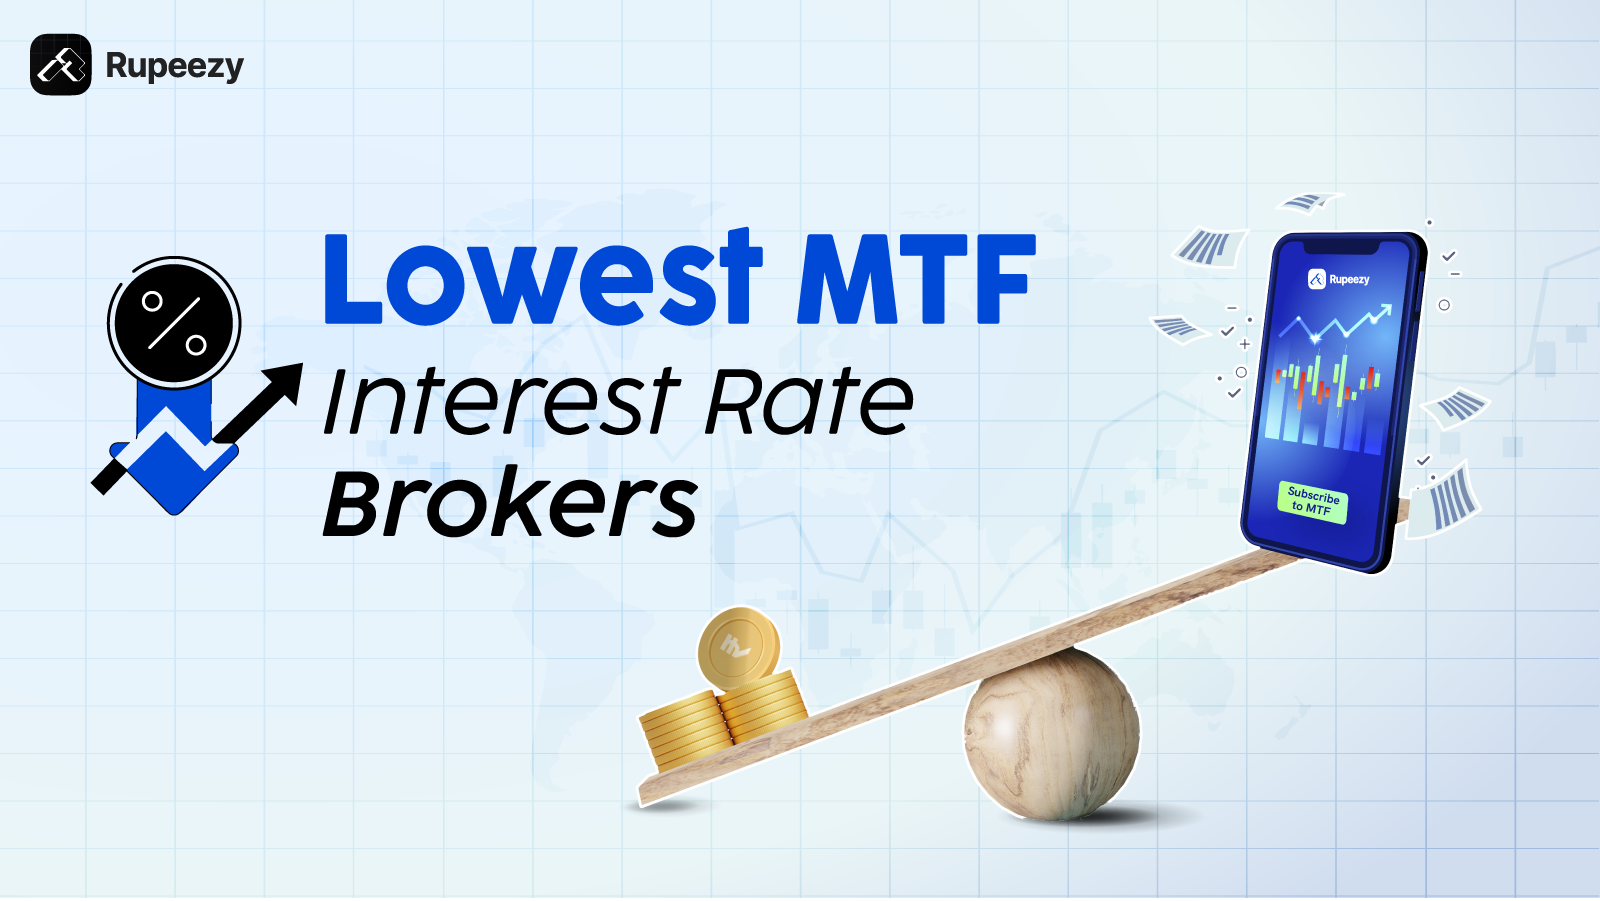 Lowest MTF Interest Rate Brokers